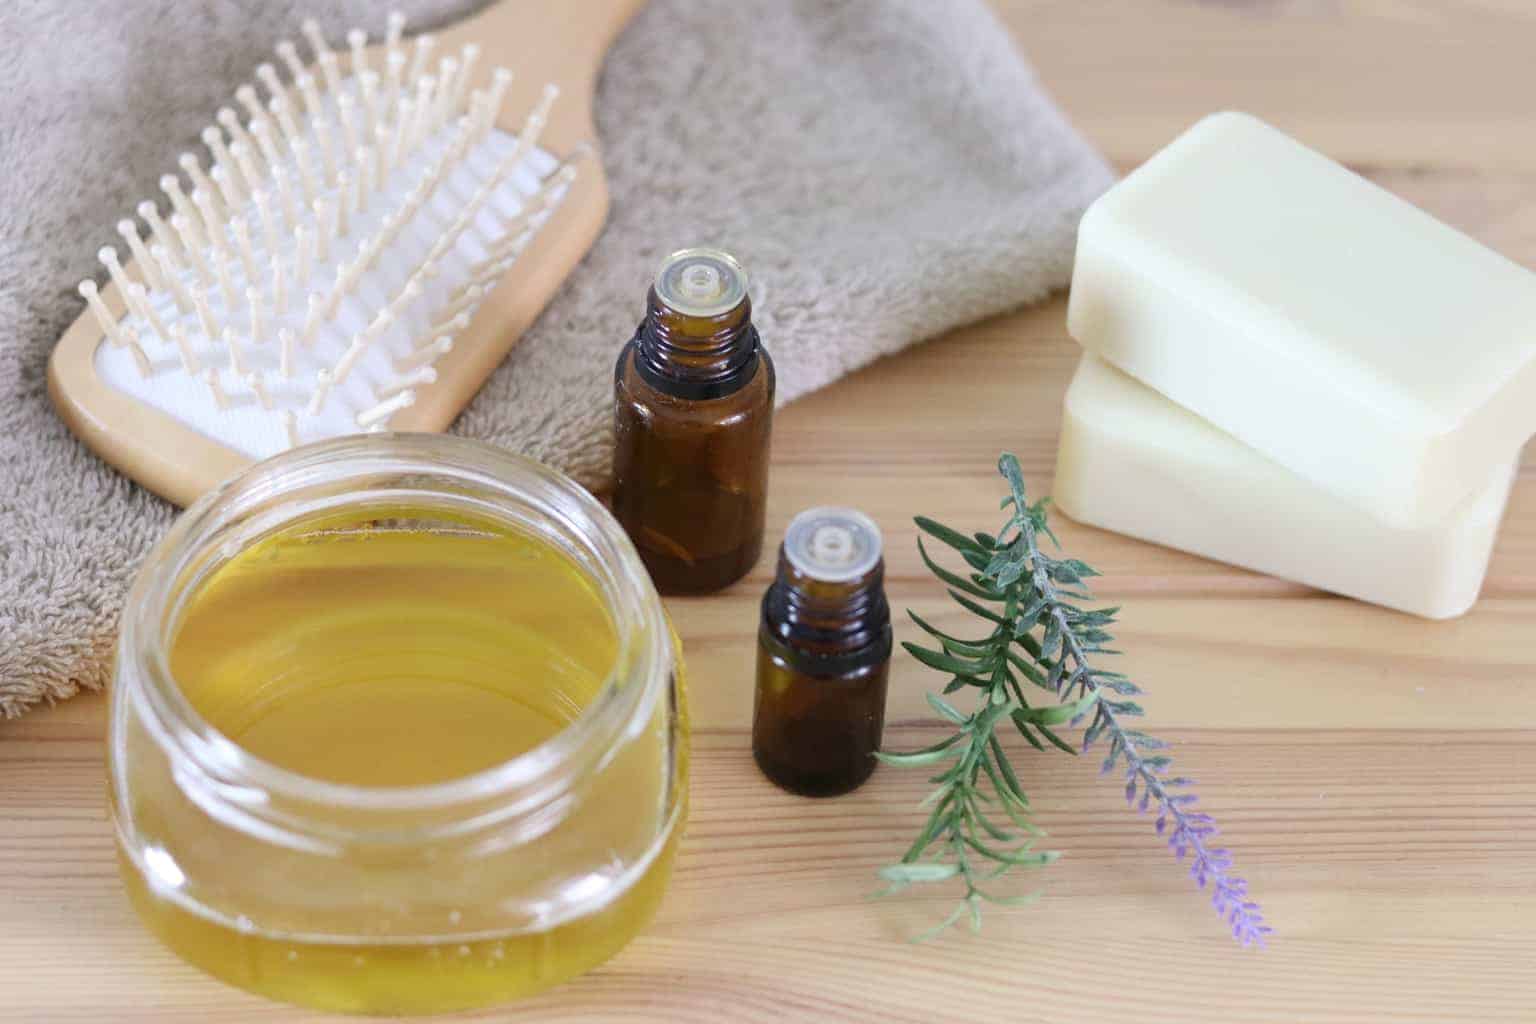 Healthy homemade conditioner on table with hair brush, soap bars, and essential oil bottles.